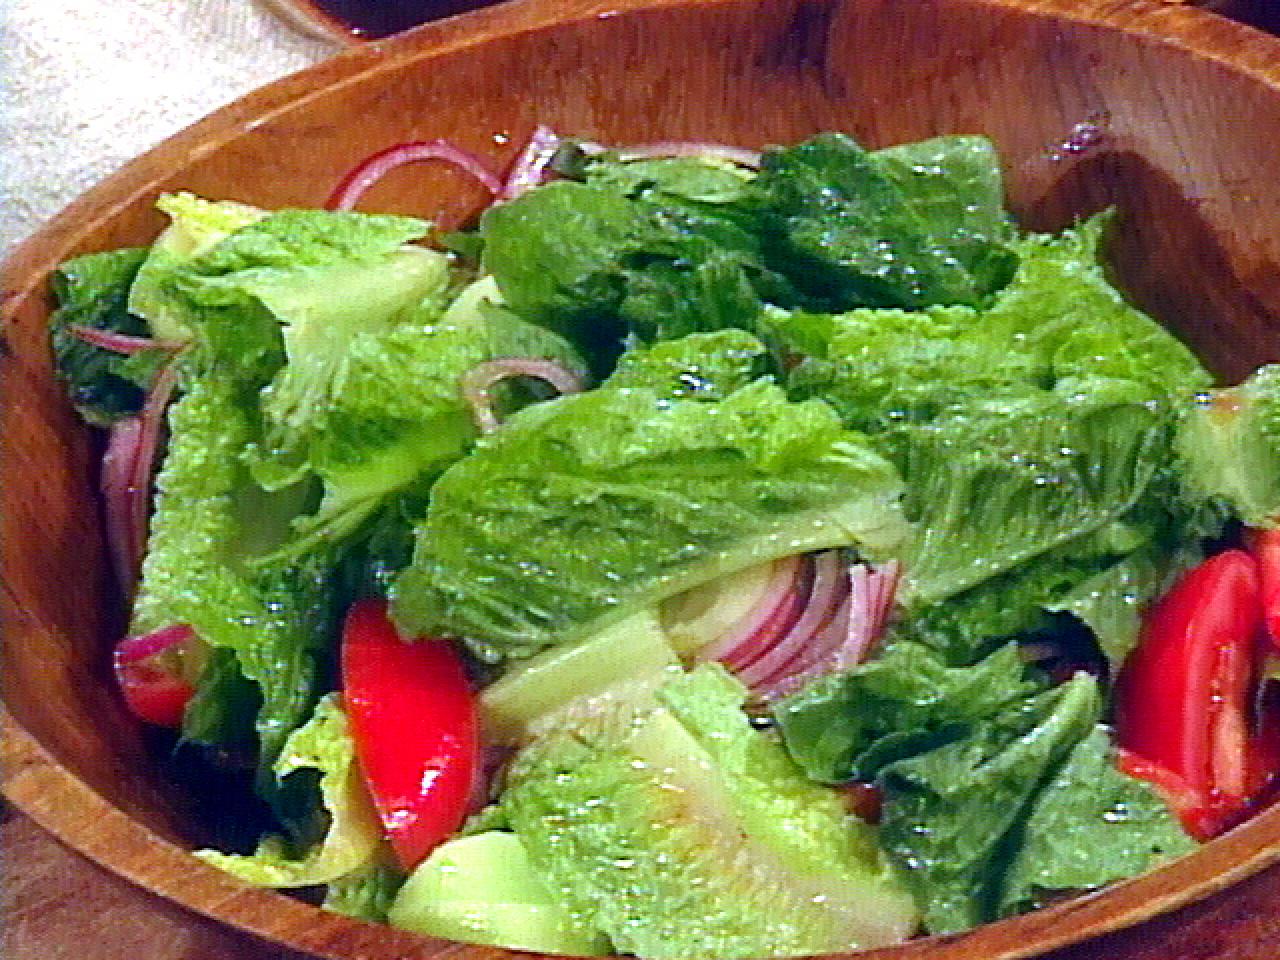 Mixed Green Salad: A Simple and Healthy Meal Choice - Home. Made. Interest.